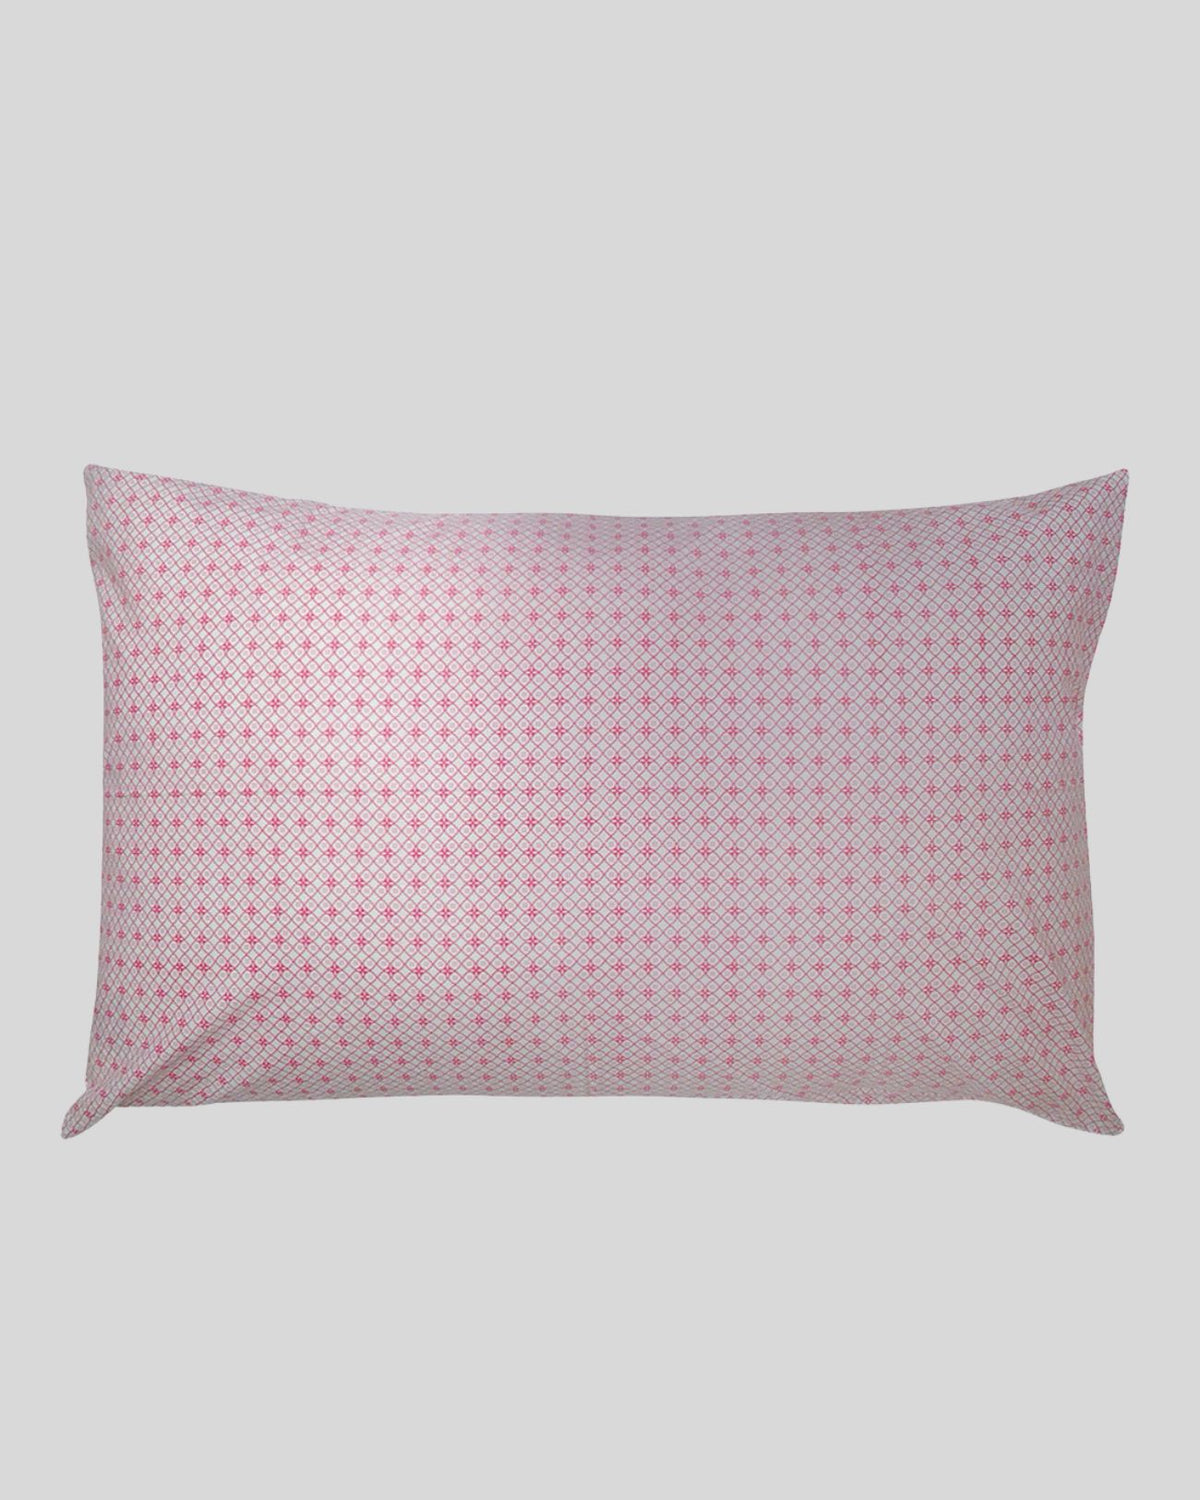 The Petite Rouge Pillowcases have a delicate, lace-like, pattern front and back. 100% brushed cotton, which is soft on children's skin. Machine Washable.  Standard Size: 48 x 73 cm